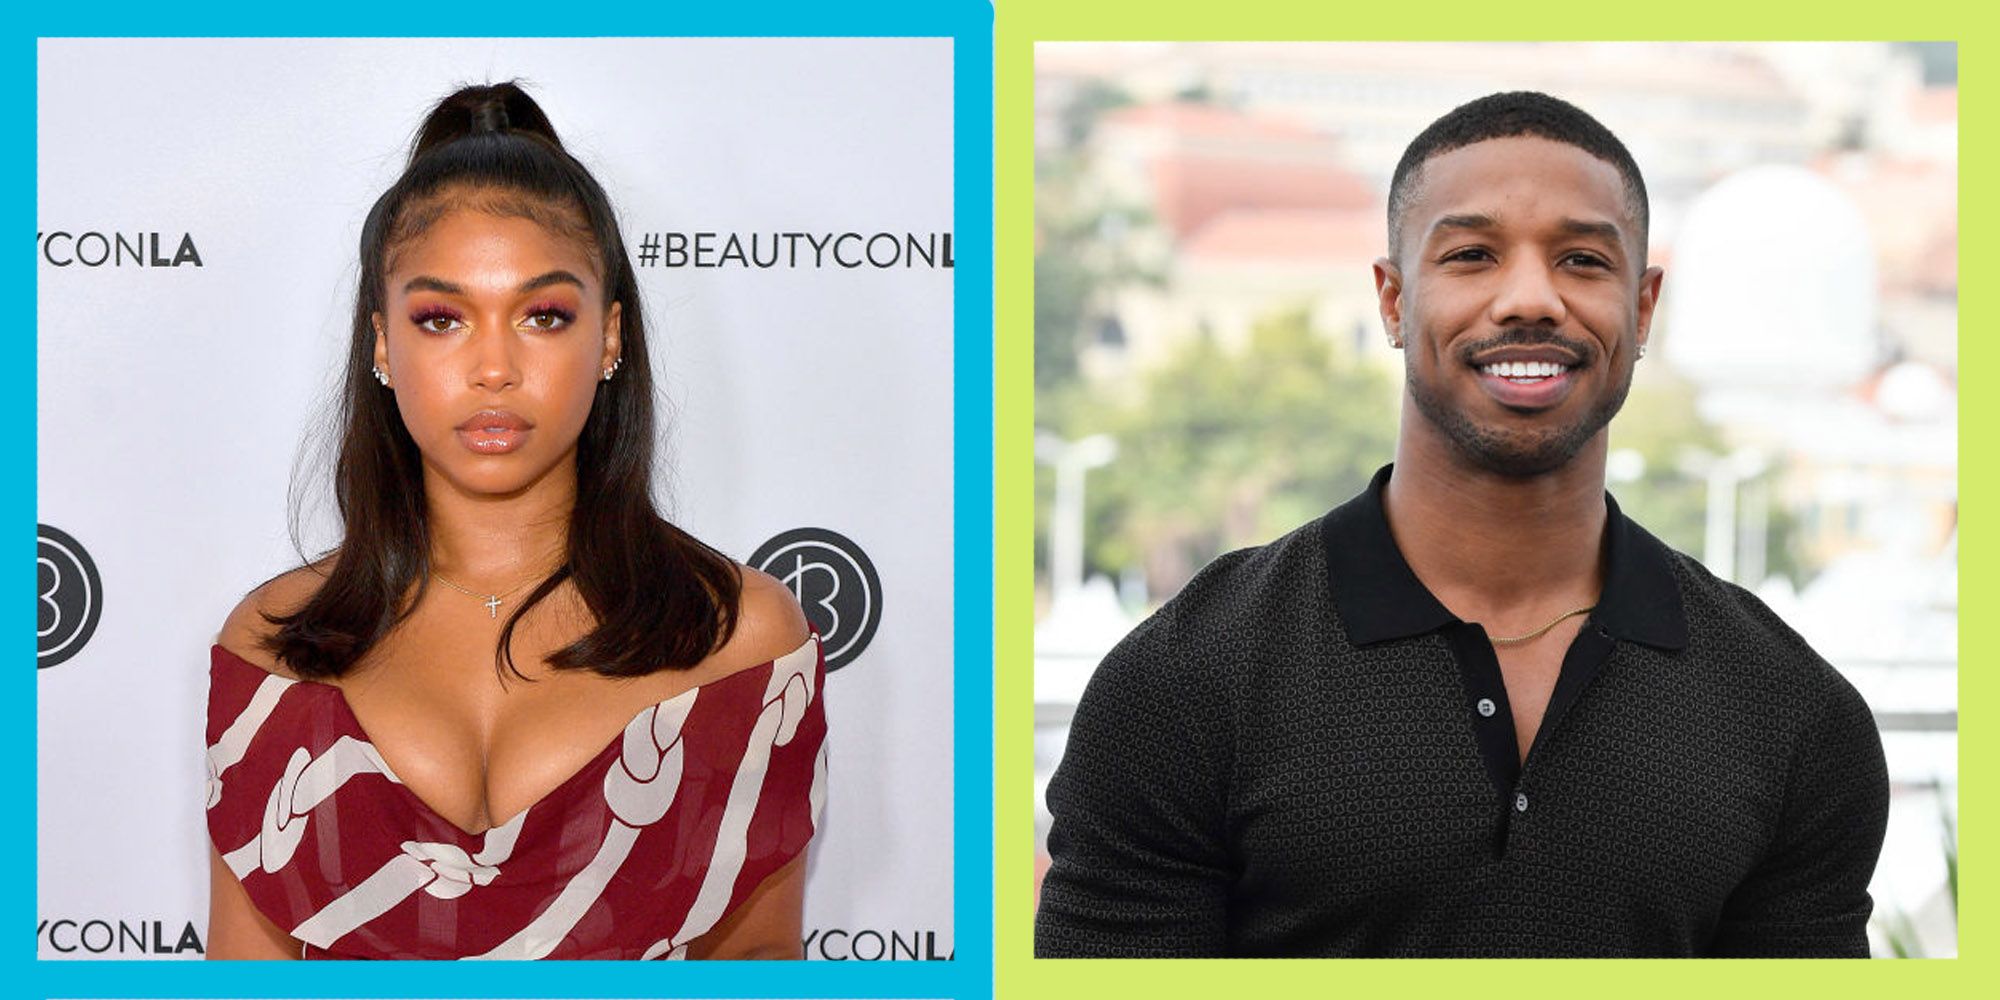 Black Panther Star Michael B Jordan Reveals Using Dating App Post His Split  With Girlfriend Lori Harvey! Girls, Here's Your Chance To Date The 'S*xiest  Man In The World